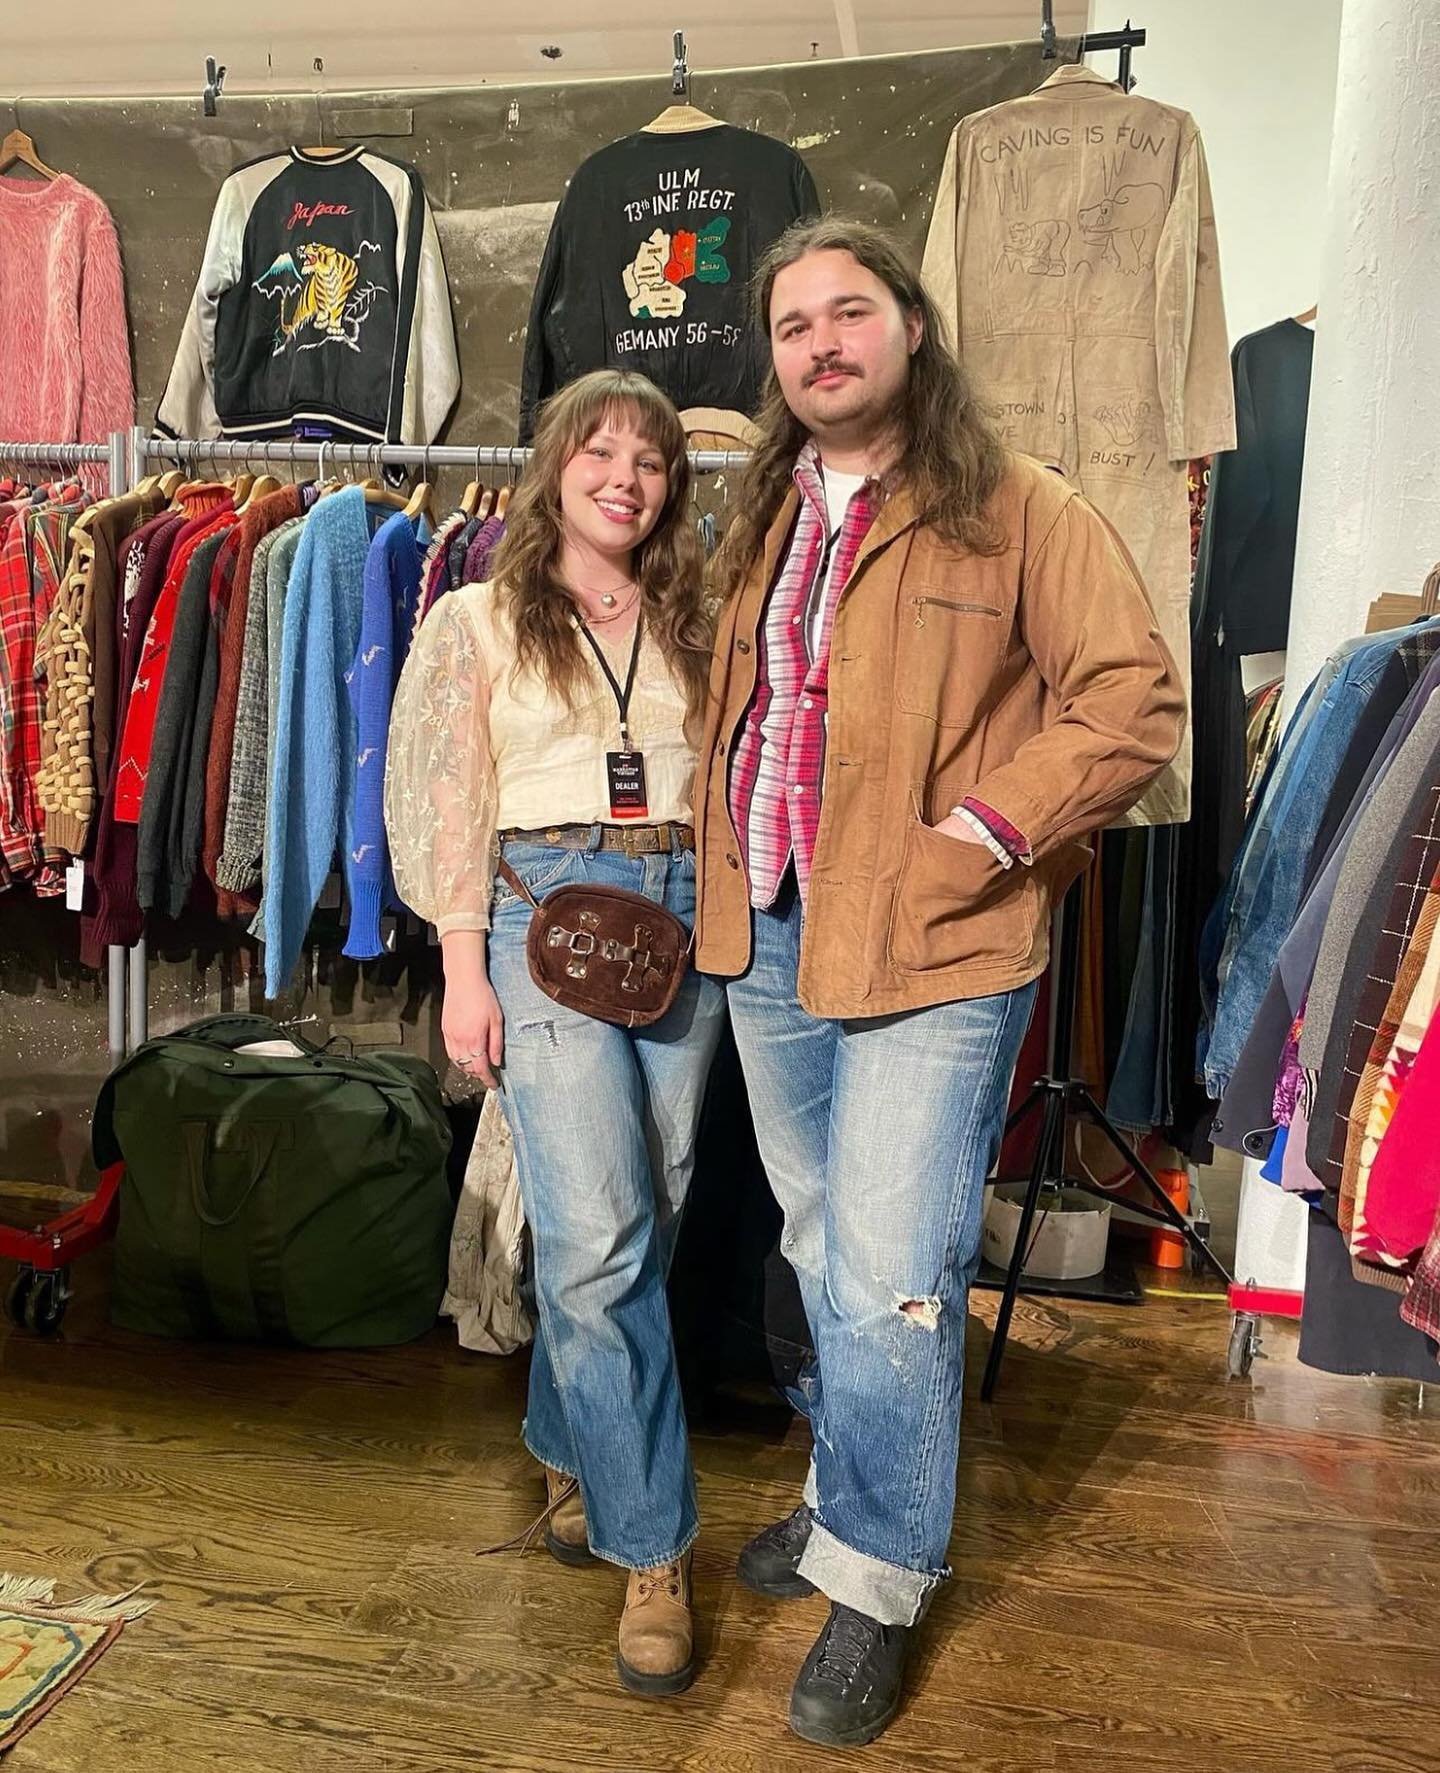 WELCOME BACK @electricglare &amp; @trashxcloset TO THE BVE💕SEE YOU LOVEBIRDS SOON💕

The Baltimore Vintage Expo is a highly curated one-day-only event celebrating the thriving community of exclusively vintage &amp; antique sellers in &amp; around th